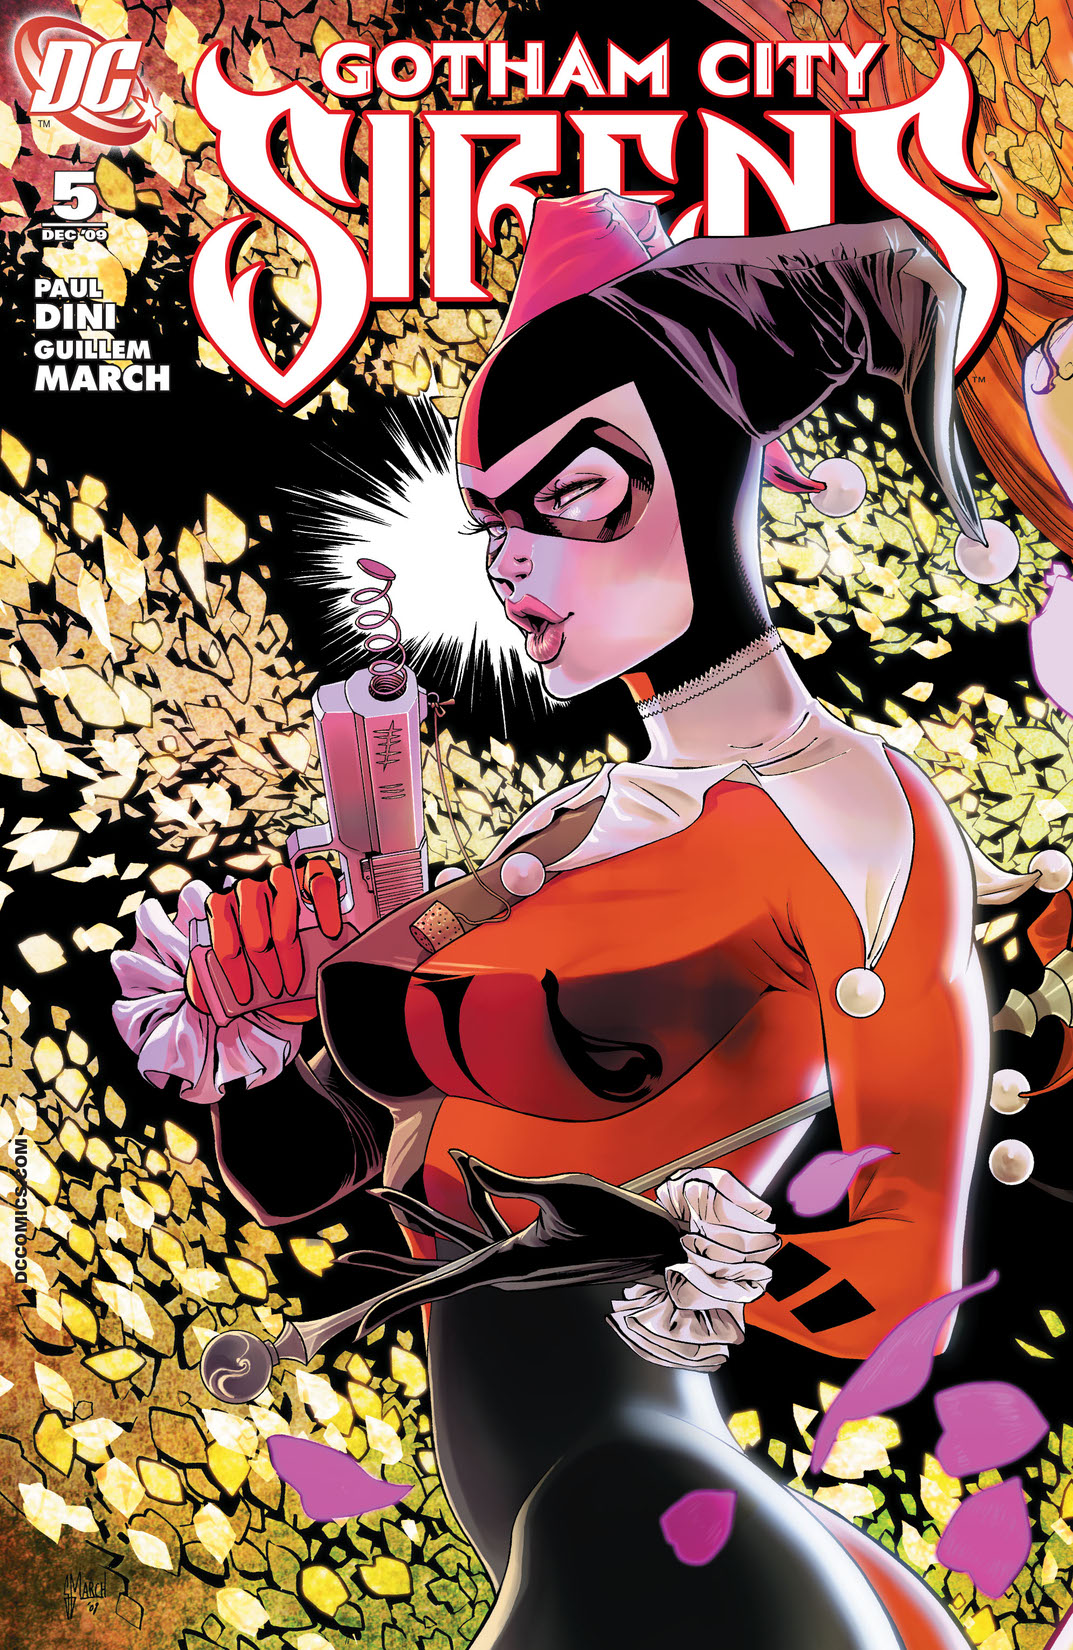 Gotham City Sirens #5 preview images